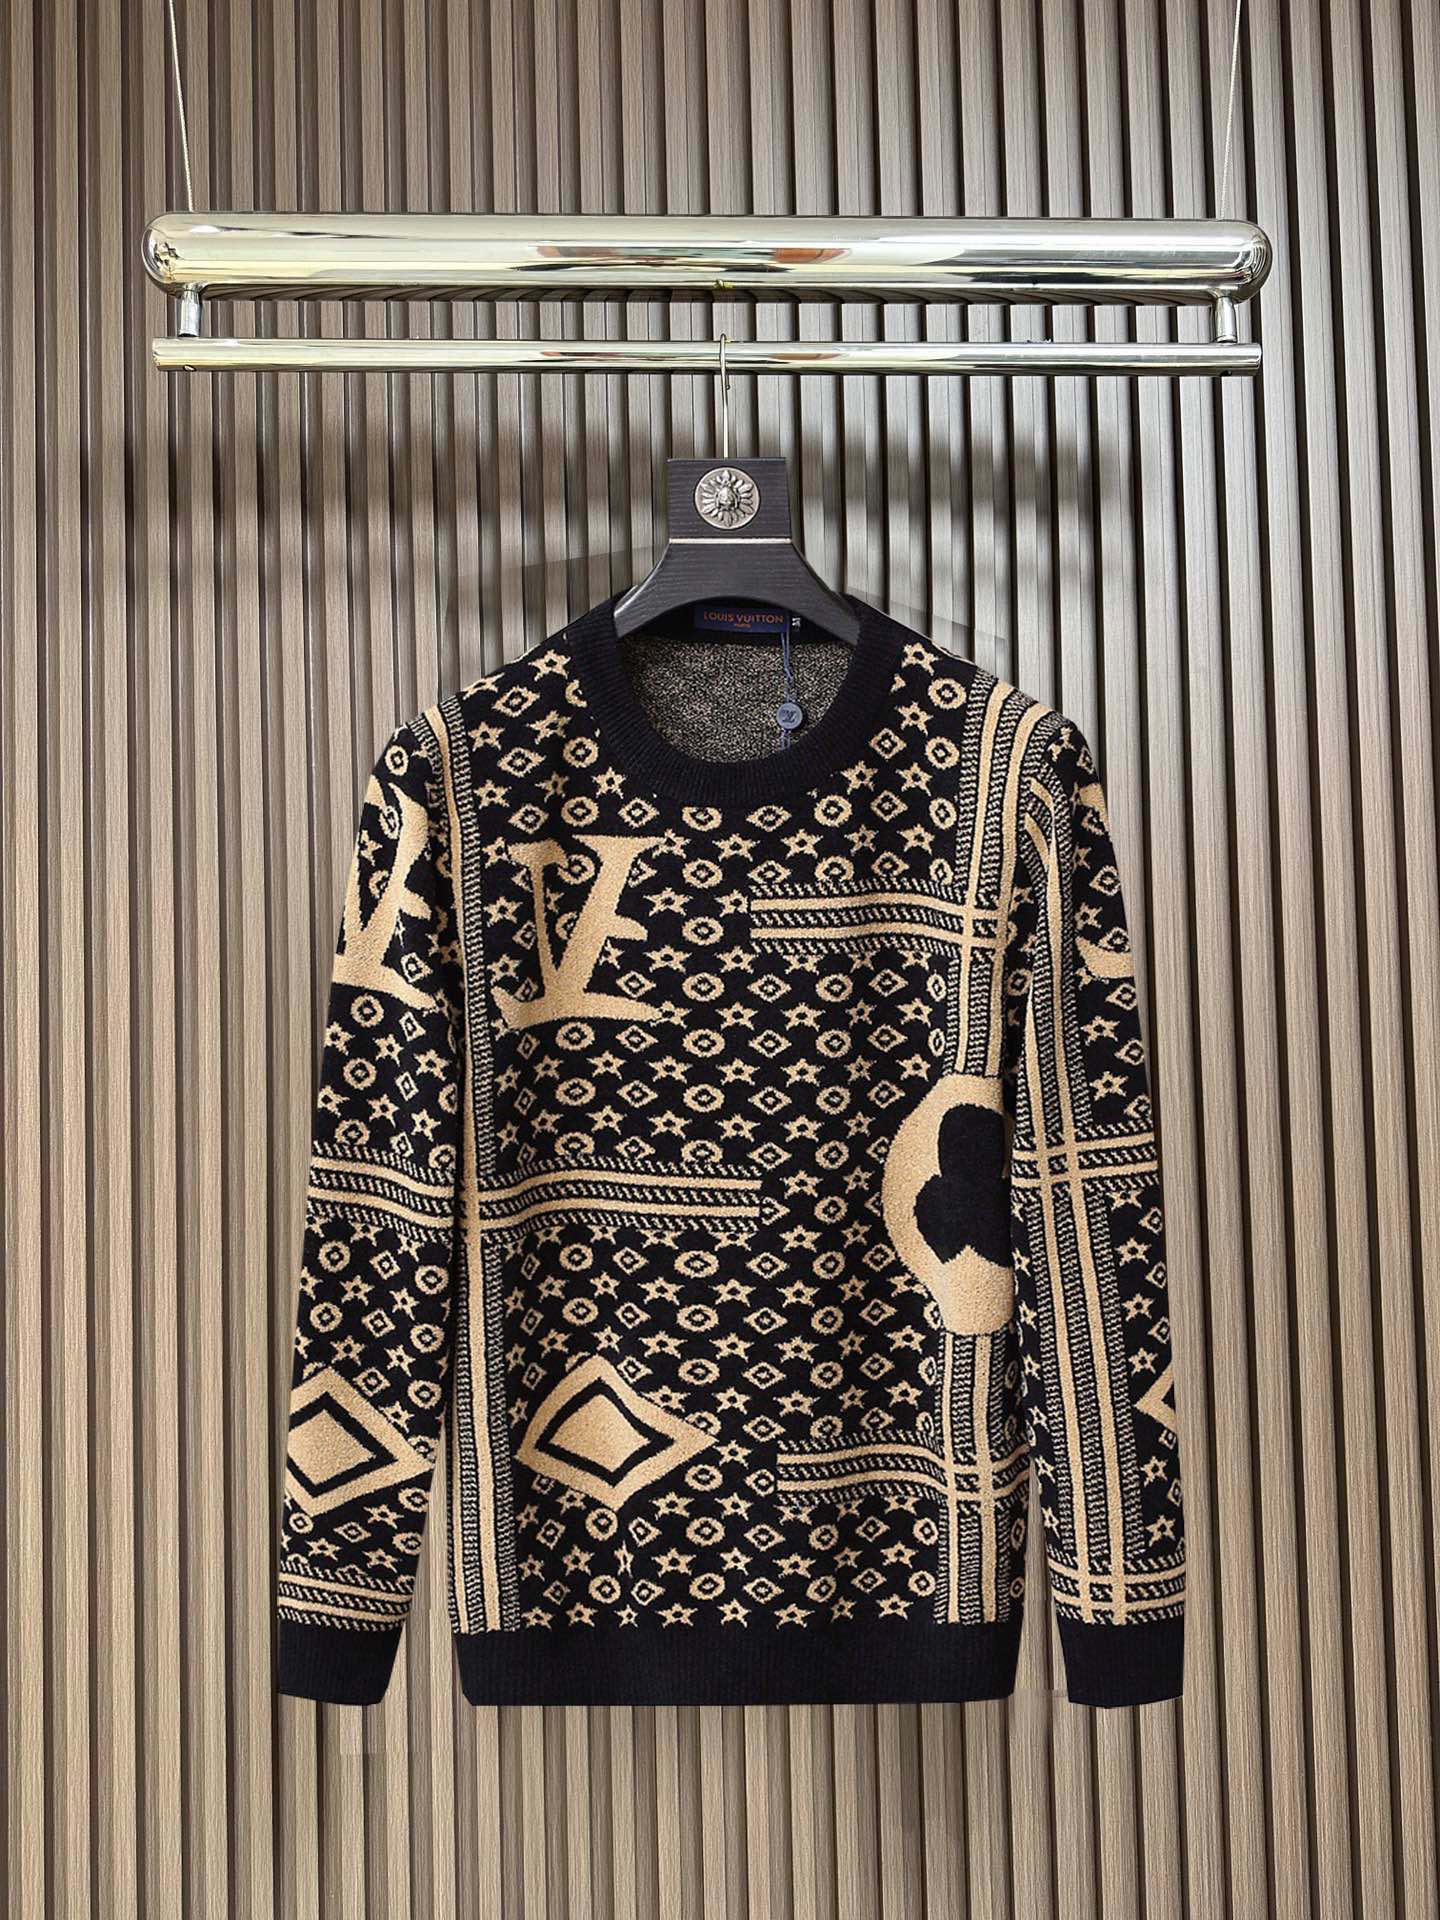 Louis Vuitton Clothing Knit Sweater Knitting Wool Fall/Winter Collection Fashion